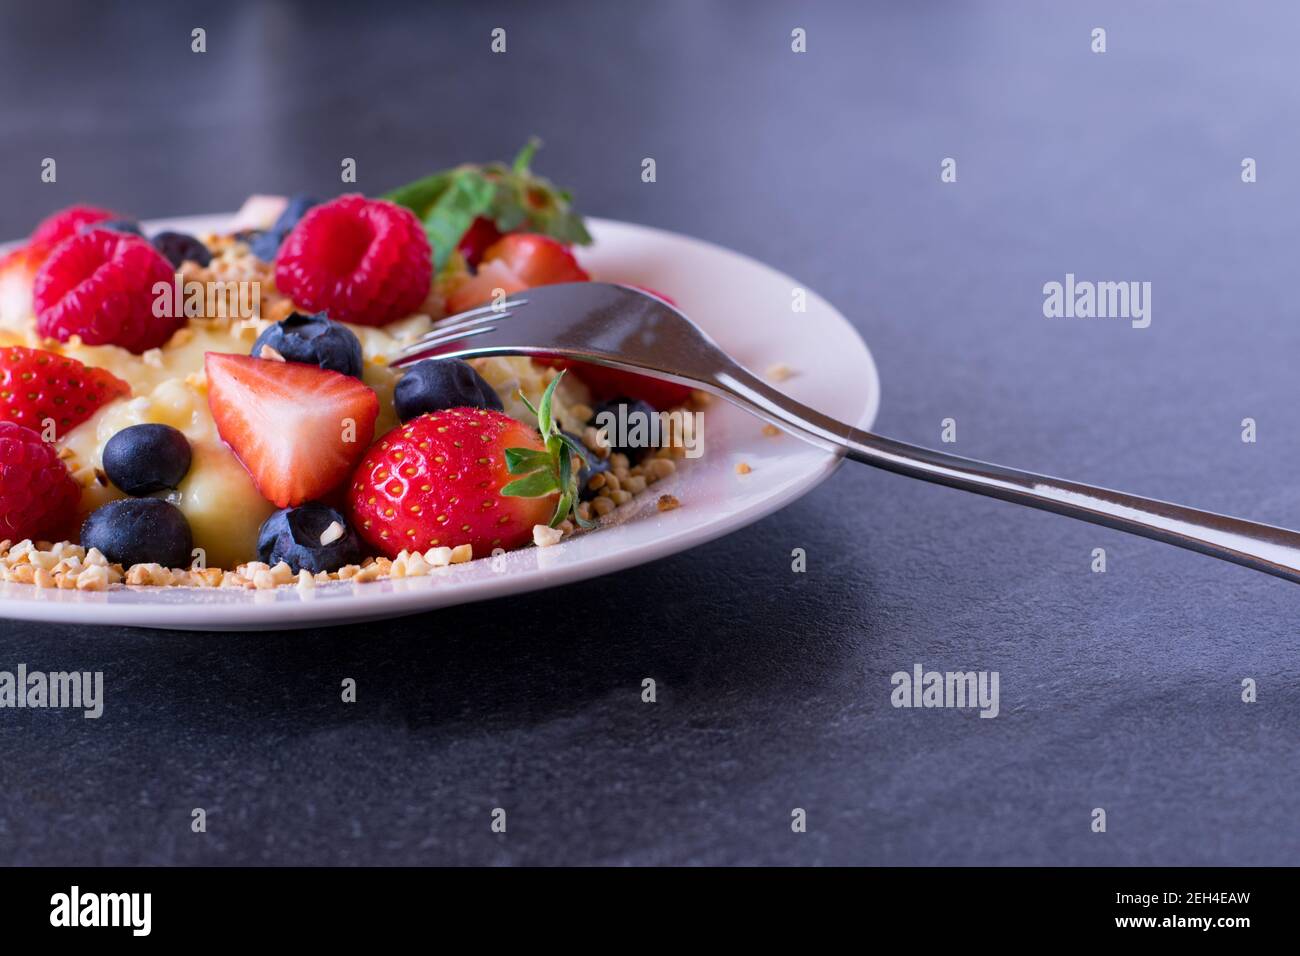 Pre Workout meal with high protein pudding, fresh berries, roasted almonds served on a plate with copy space Stock Photo